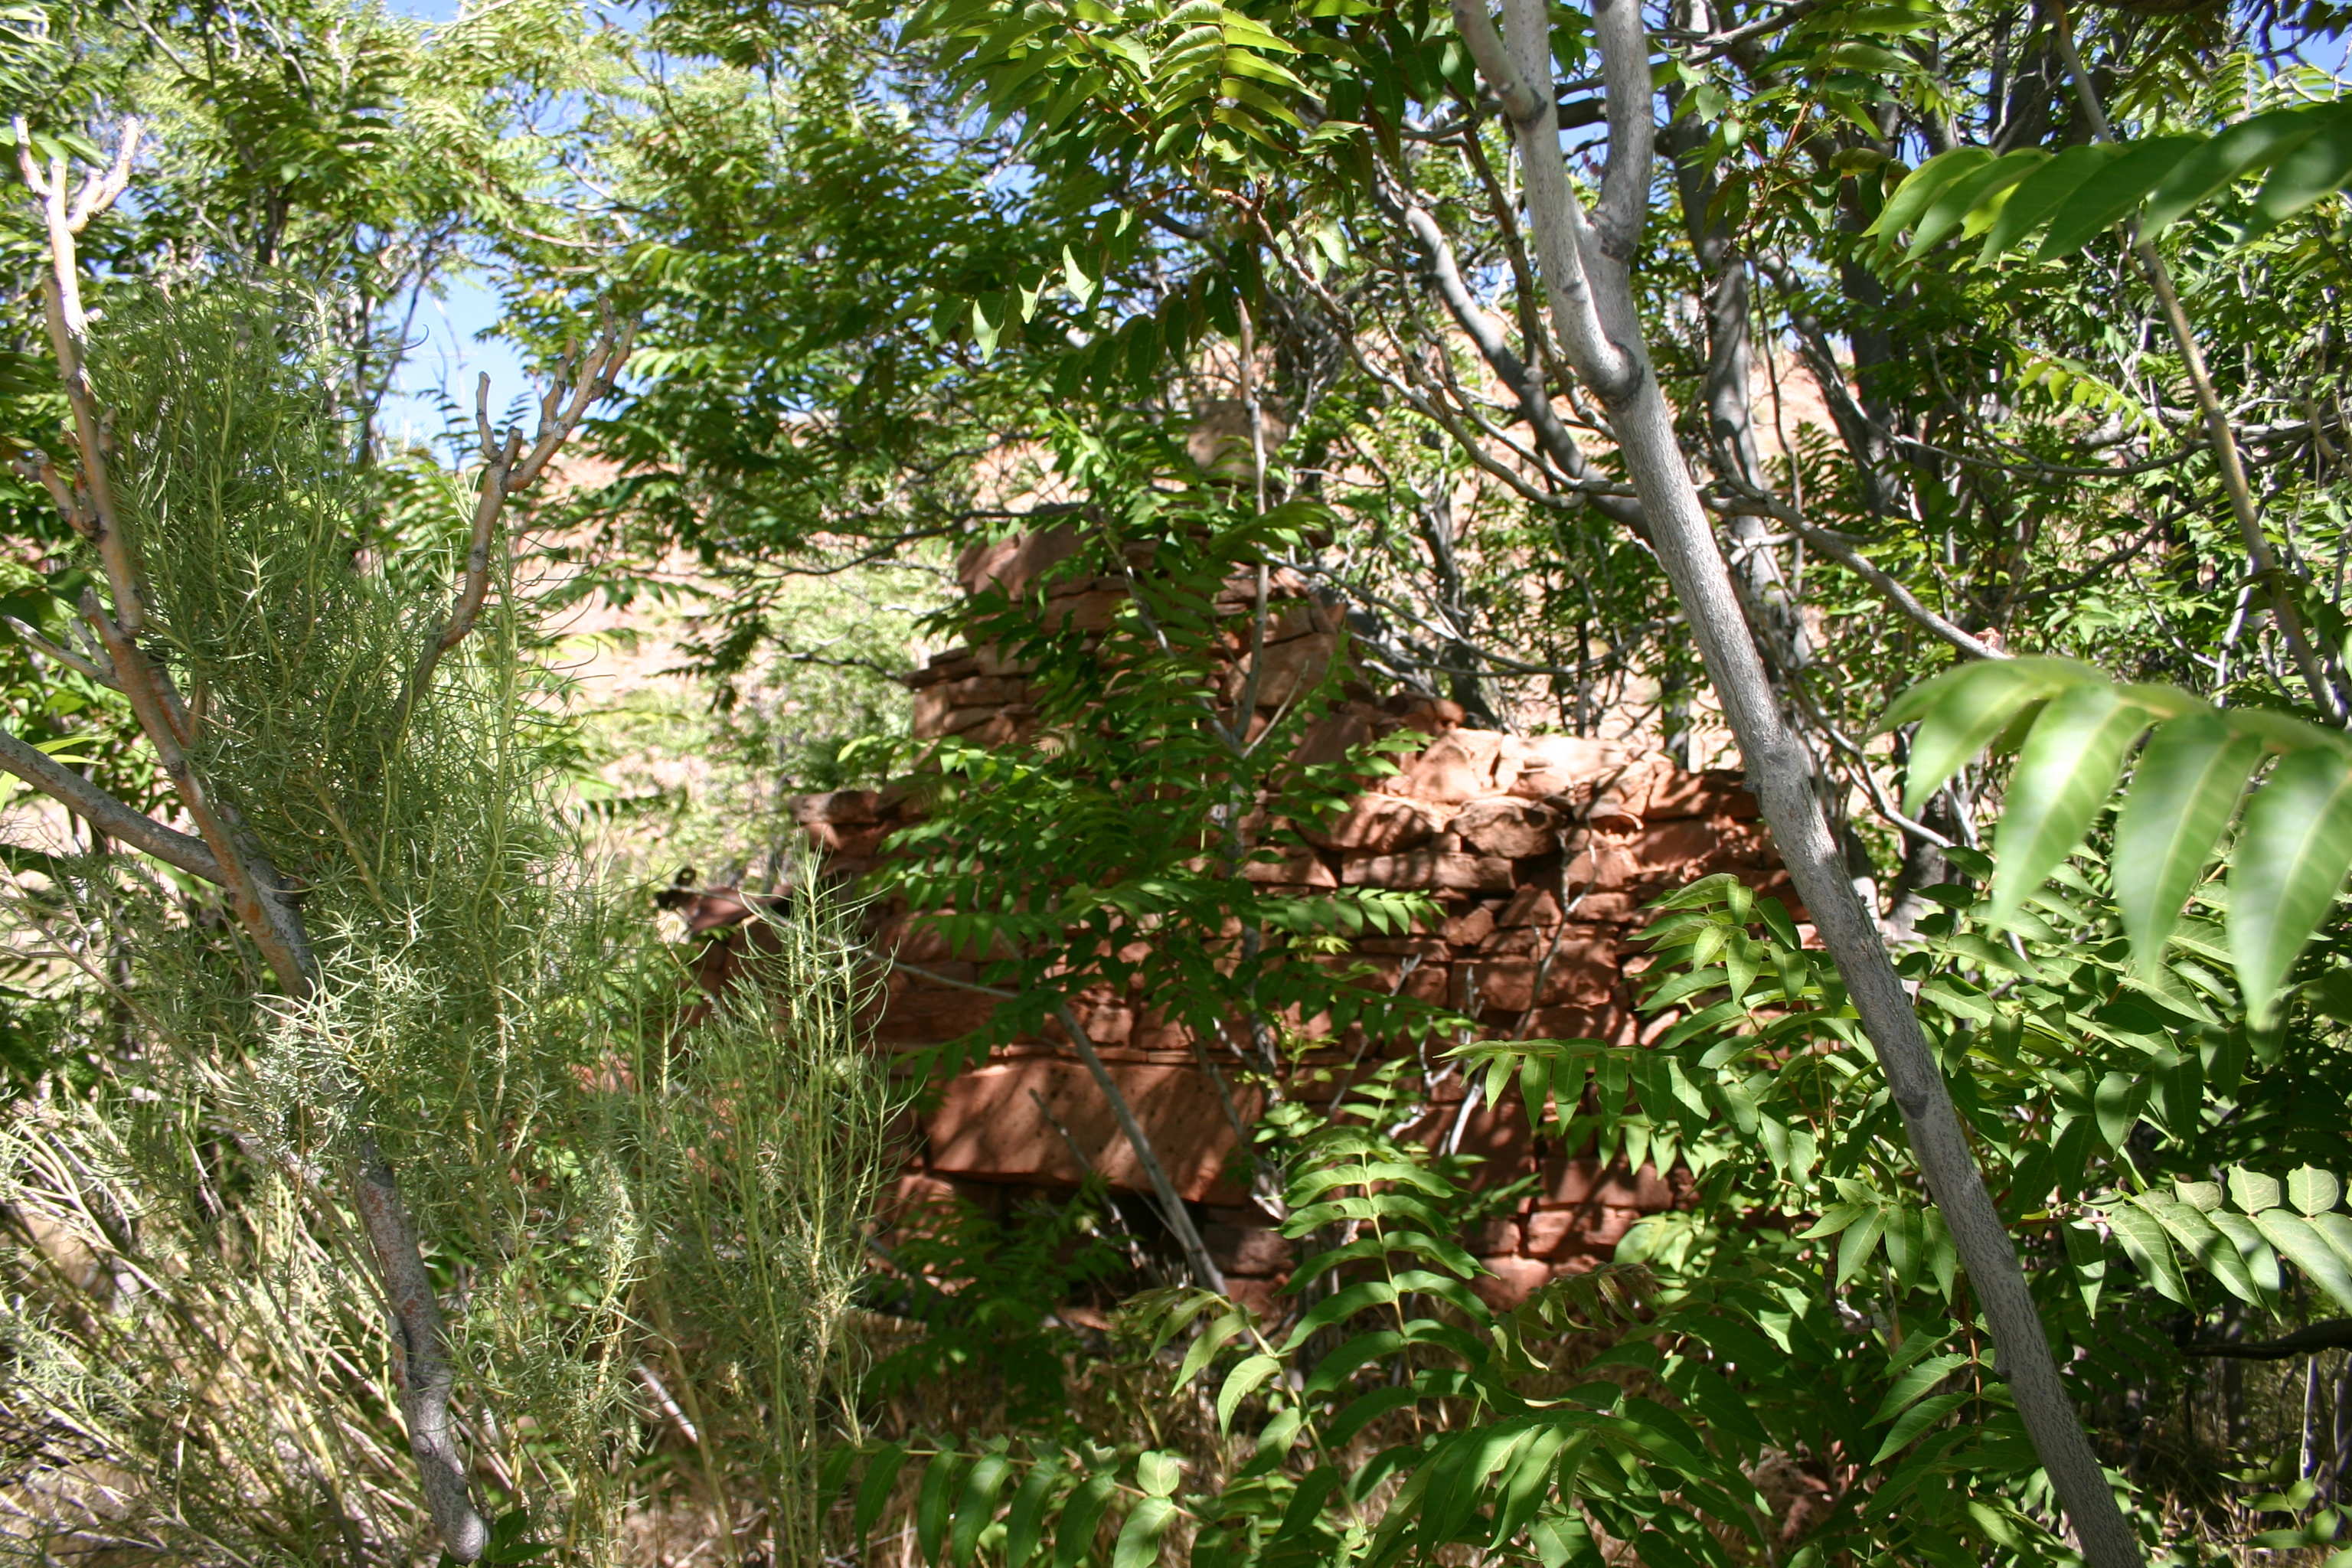 Ruins of the DeMille Rock House in Shunesburg